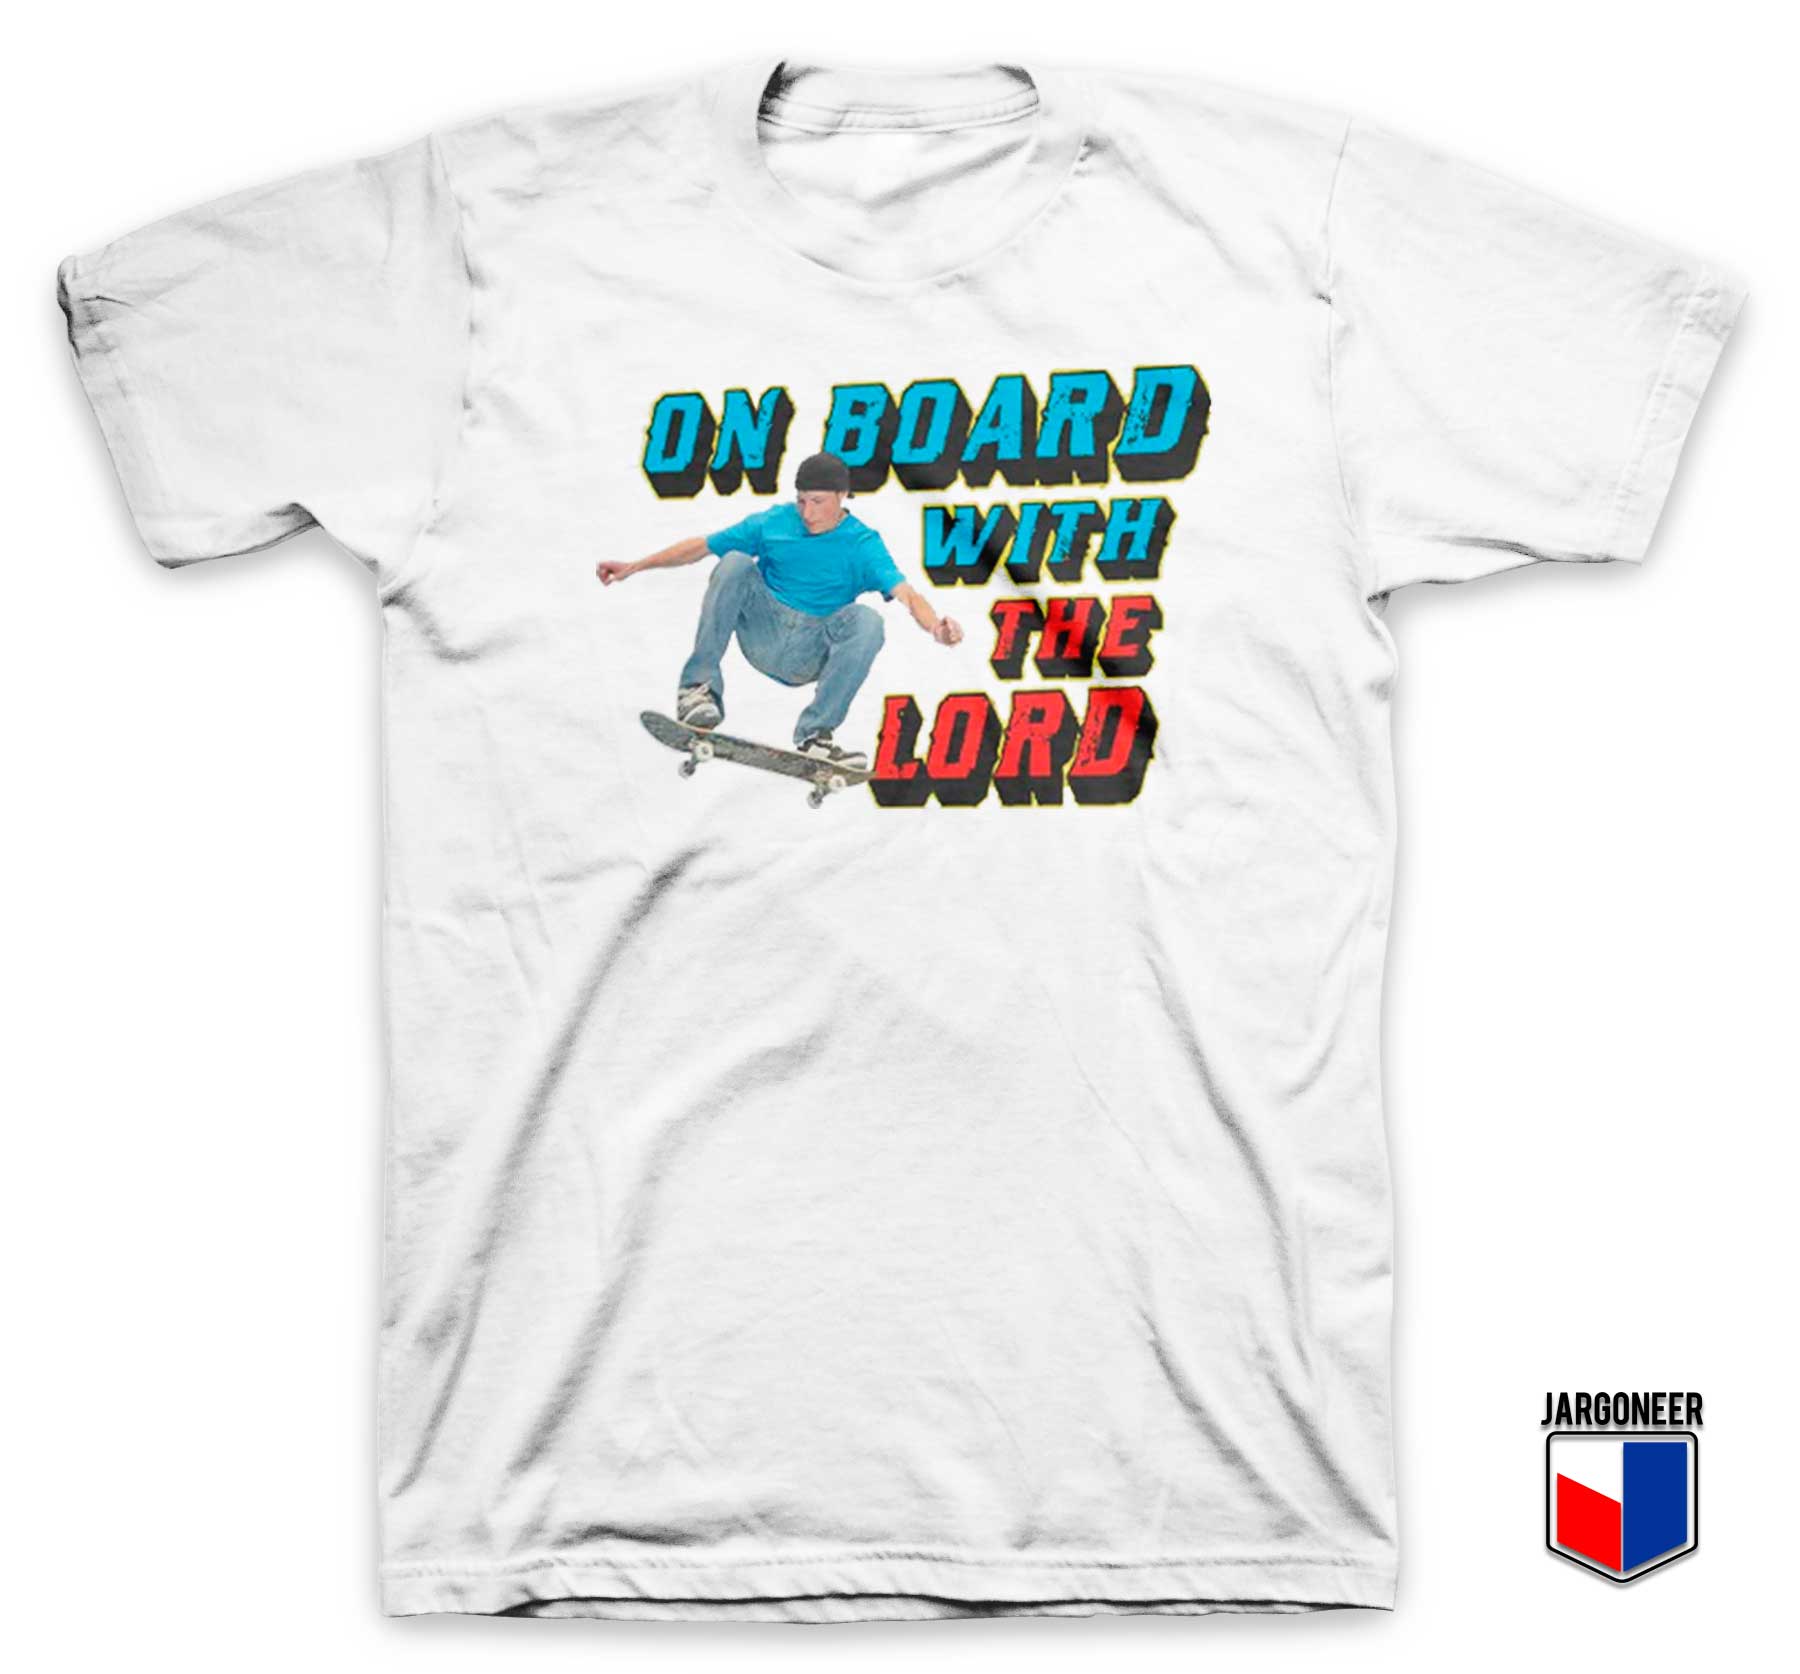 On Board With The Lord White T Shirt - Shop Unique Graphic Cool Shirt Designs